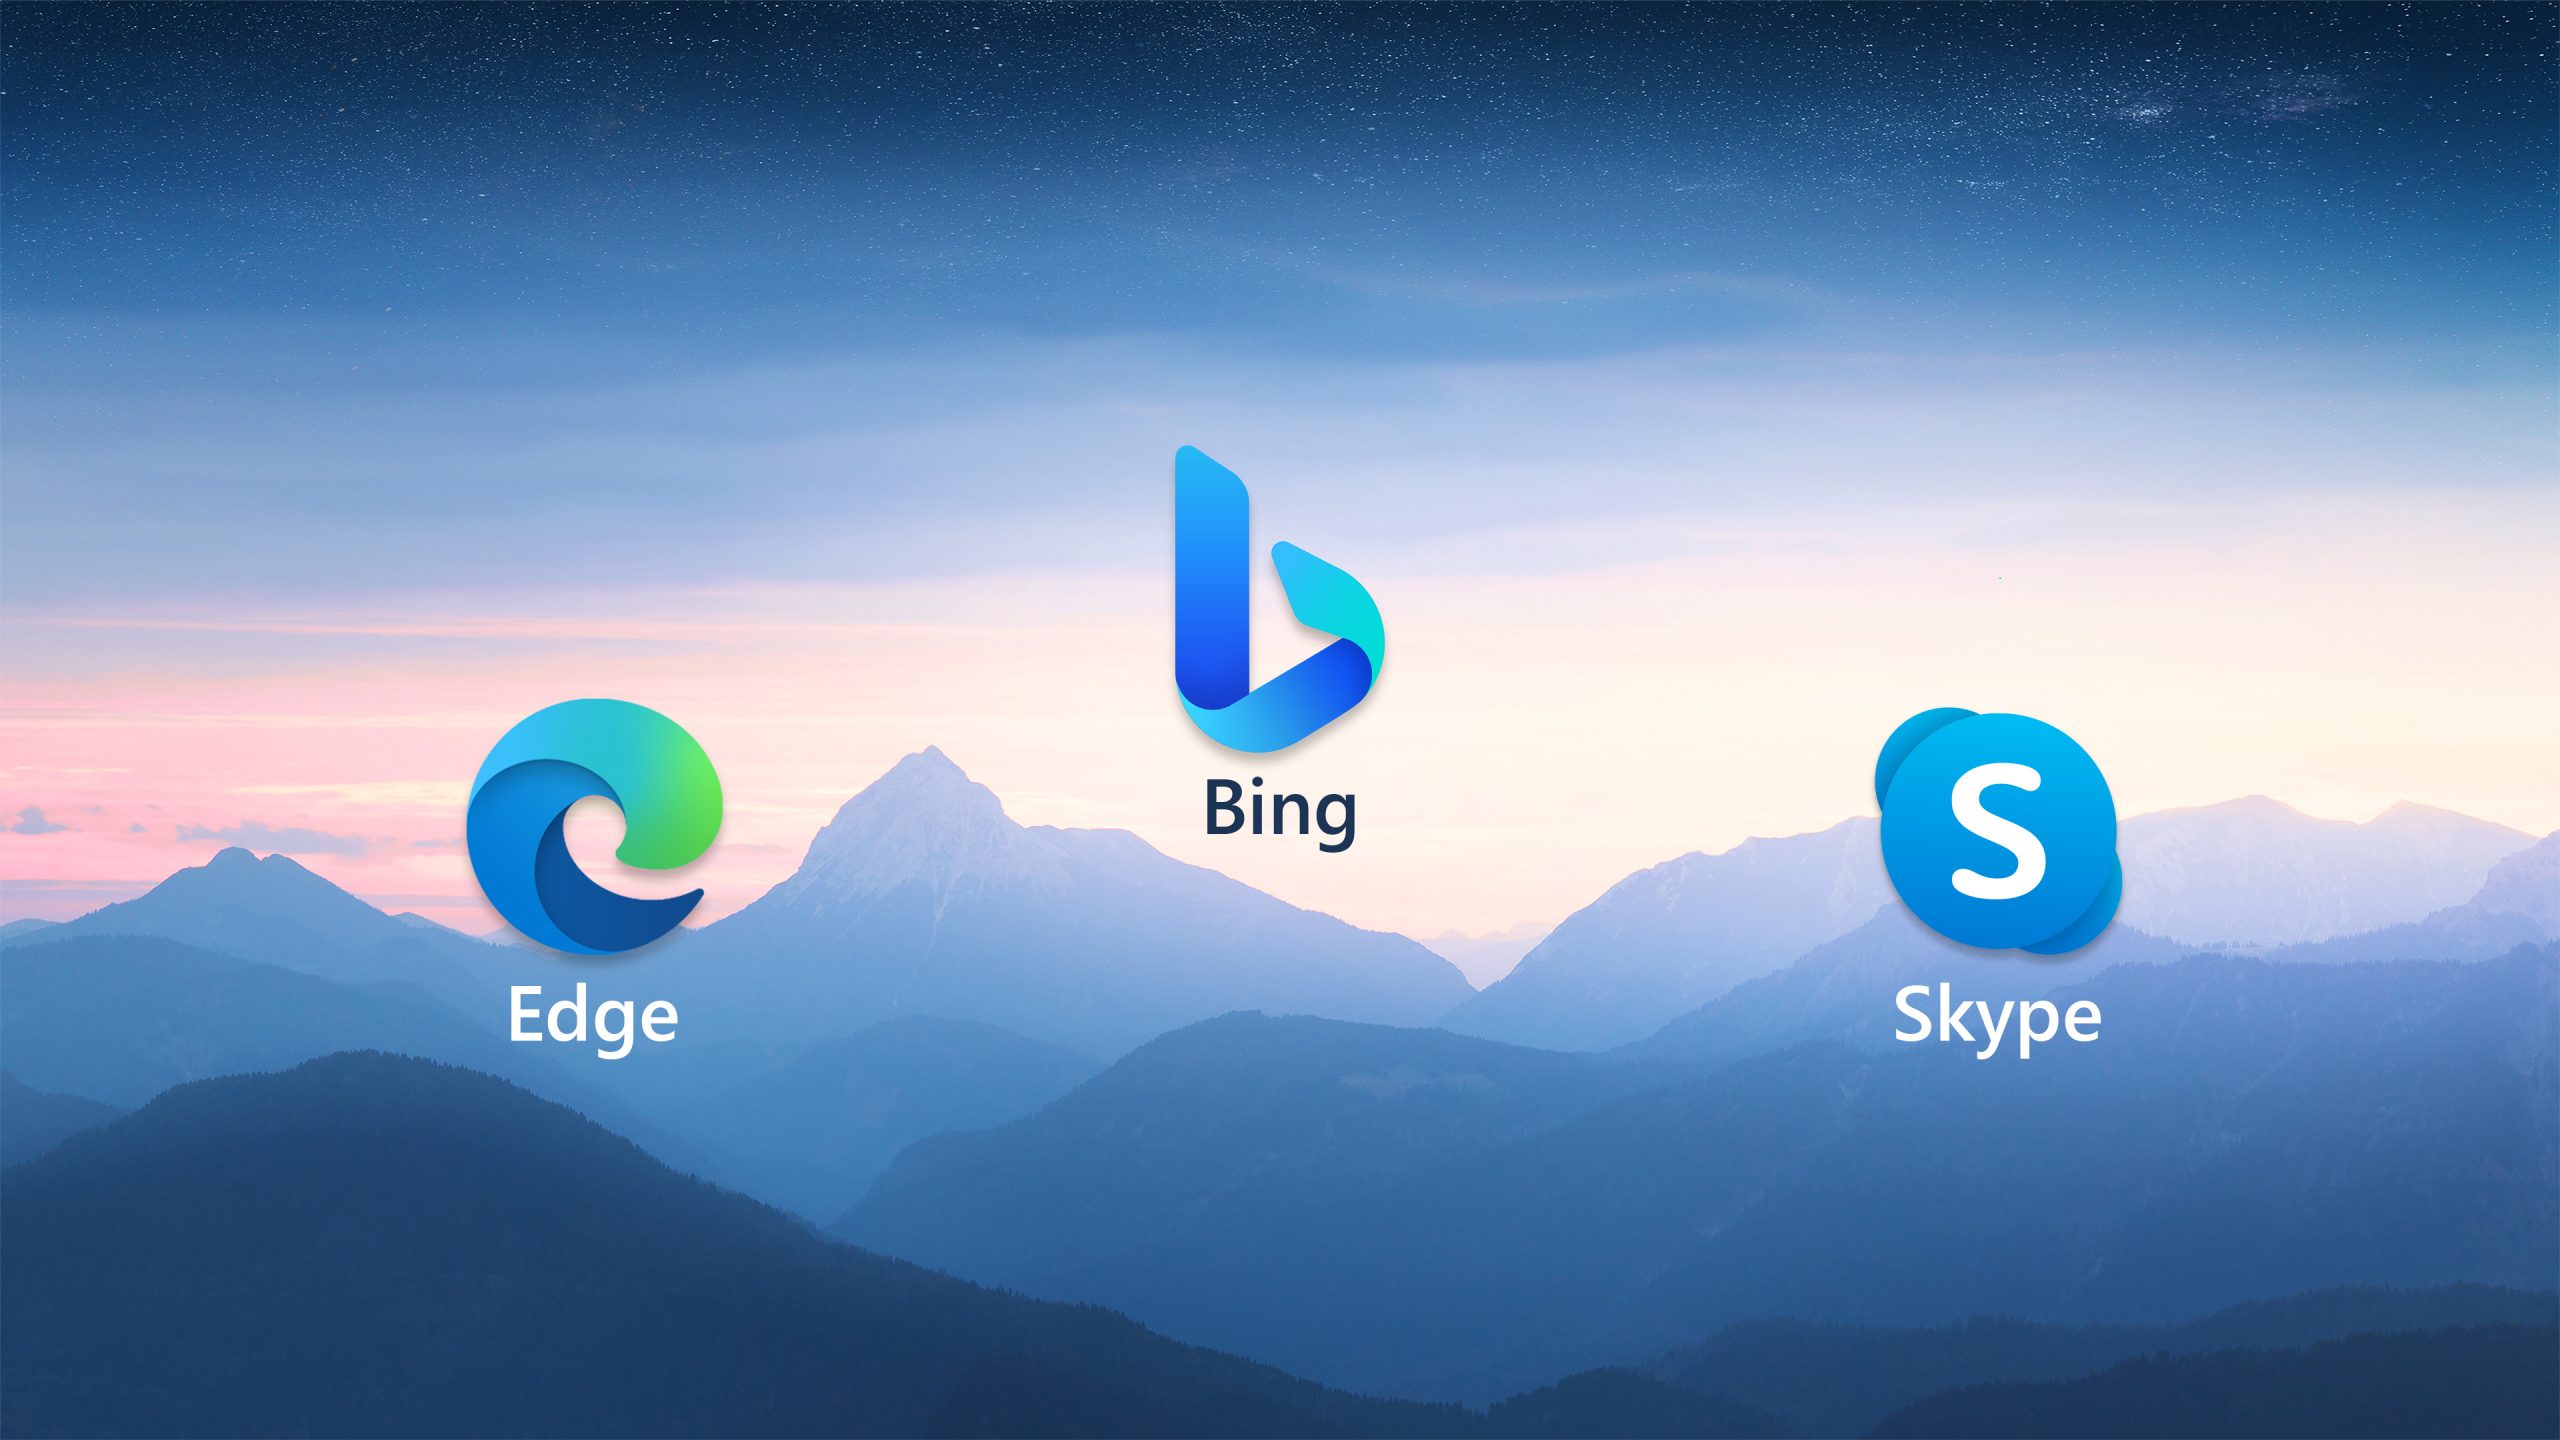 New Bing in New Places - Image show Bing, Edge, and Skype logos